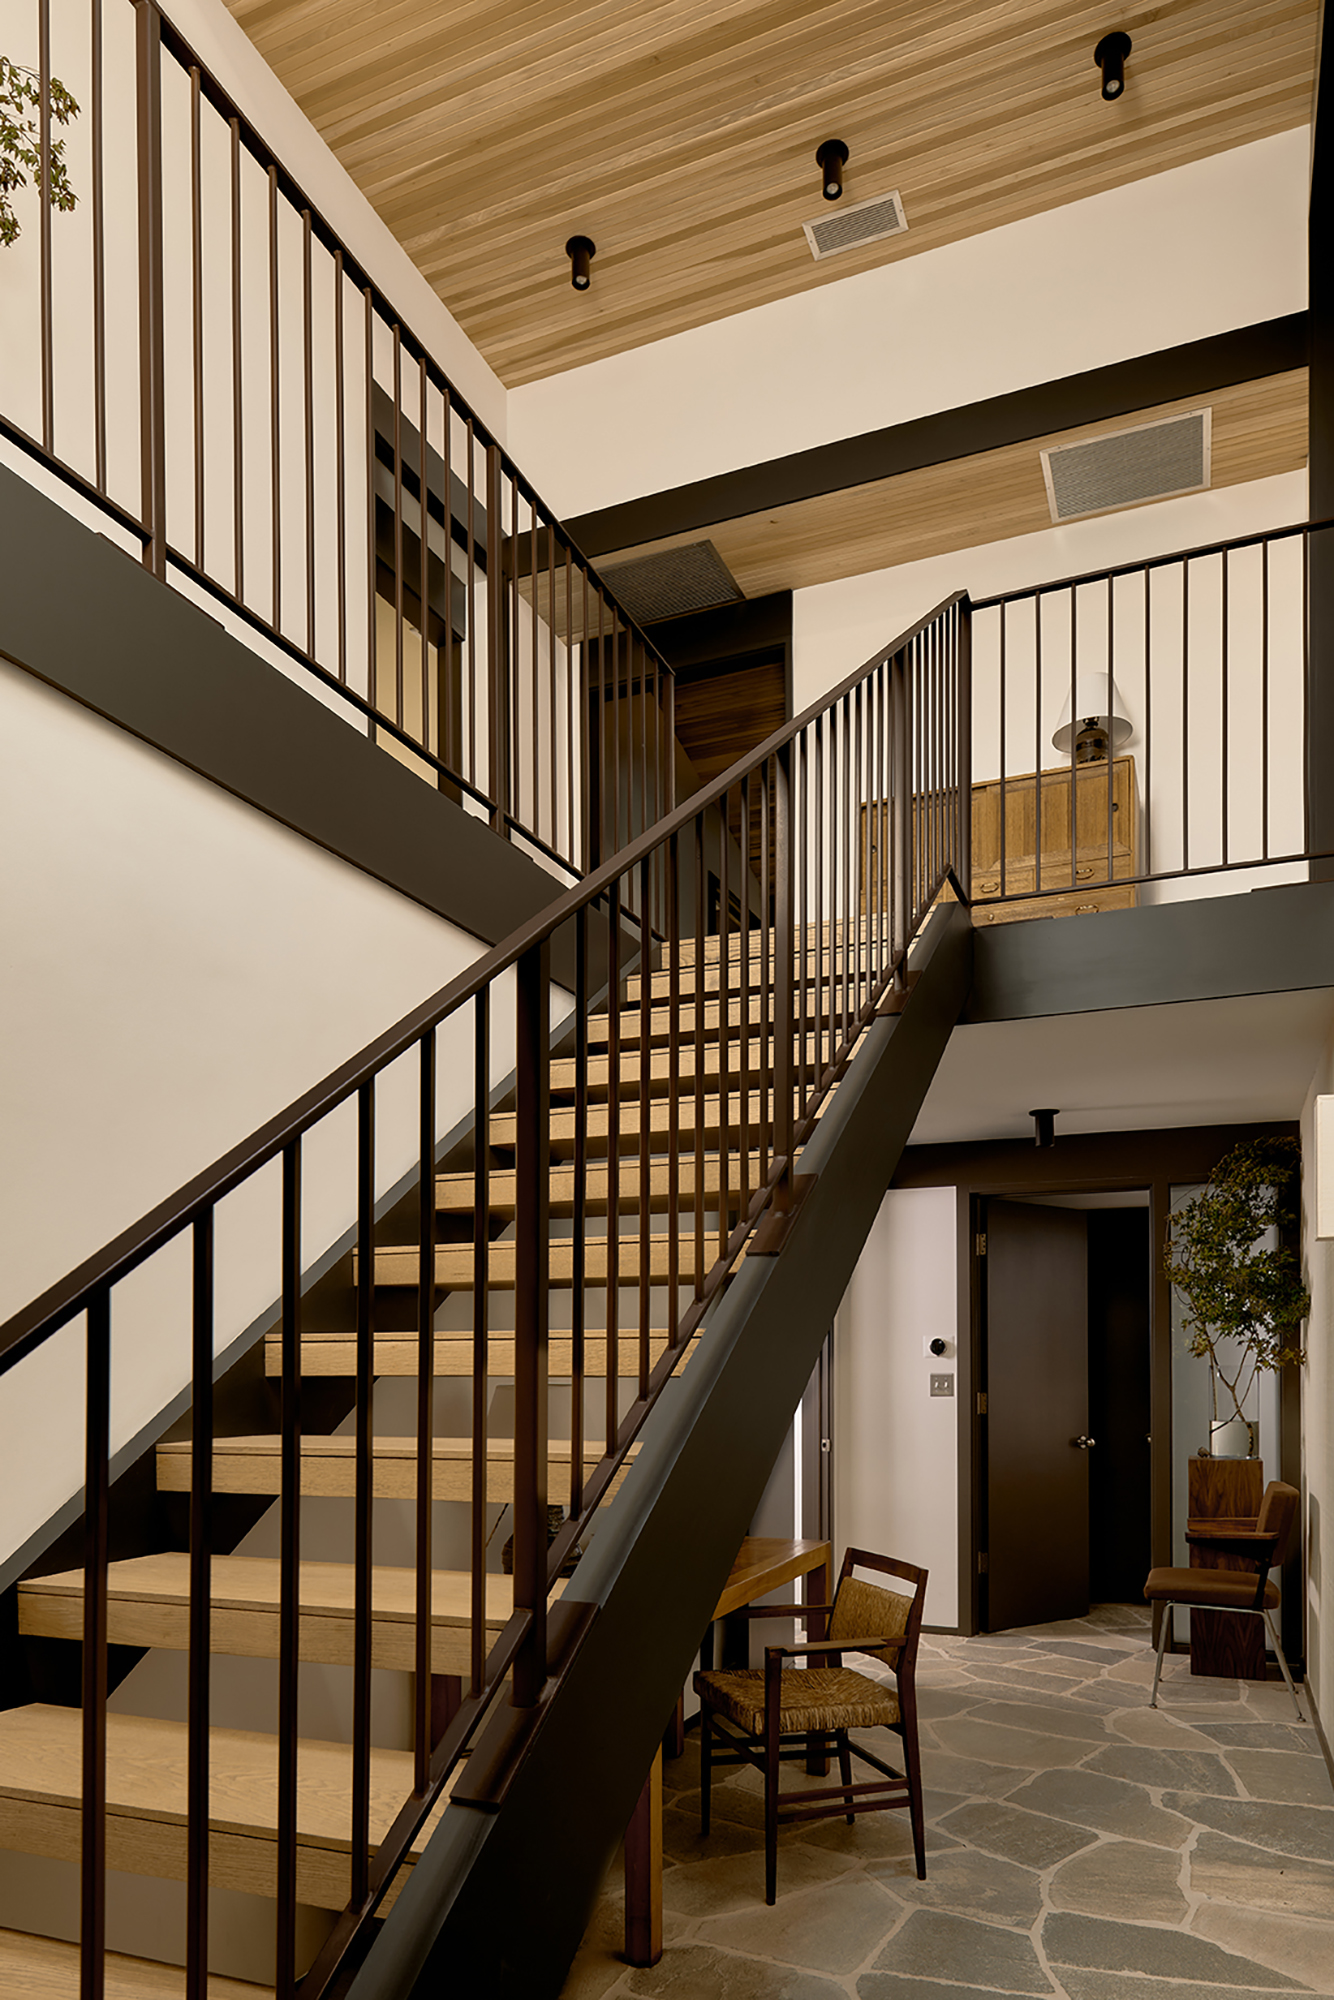 Breland-Harper 02: entryway with 20 foot ceilings and a staircase.